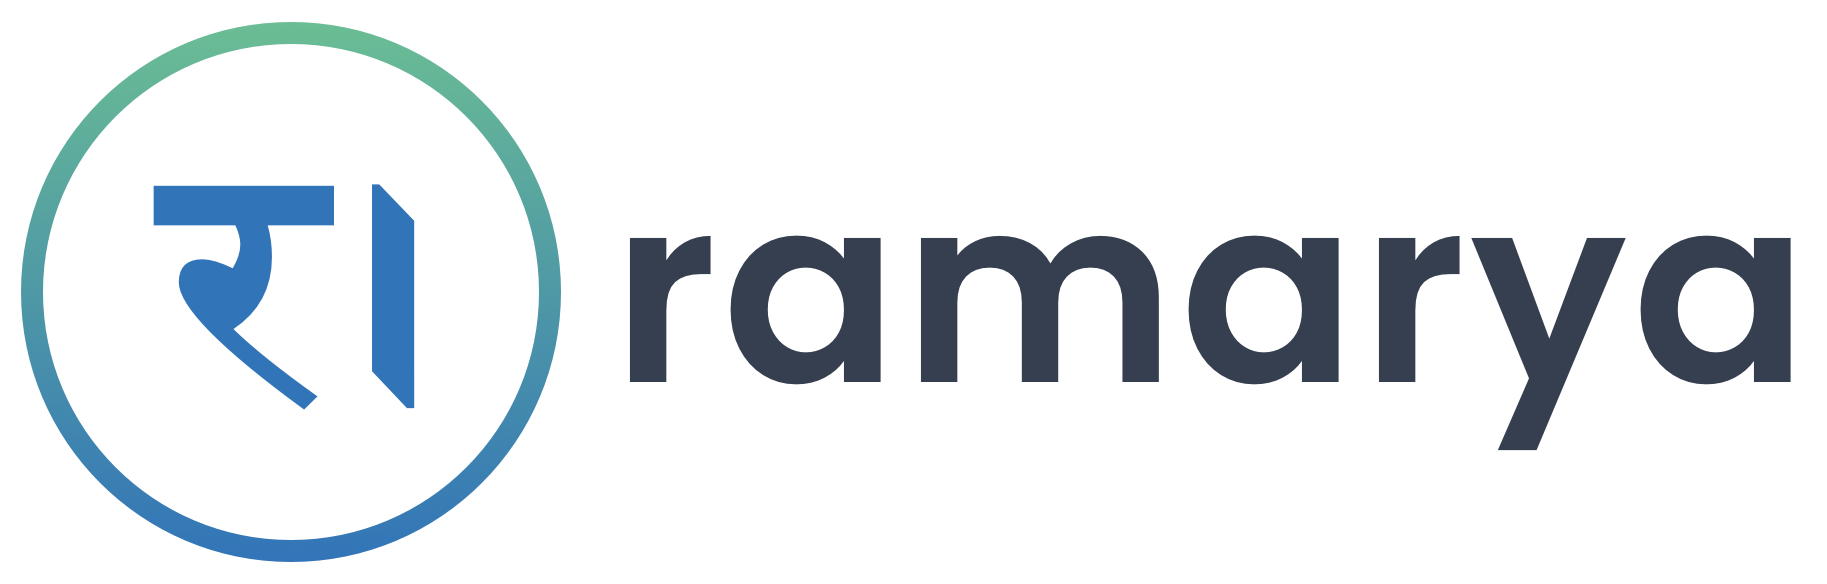 Ramarya – Expert IT Services, Scalable Solutions & Data Confidentiality